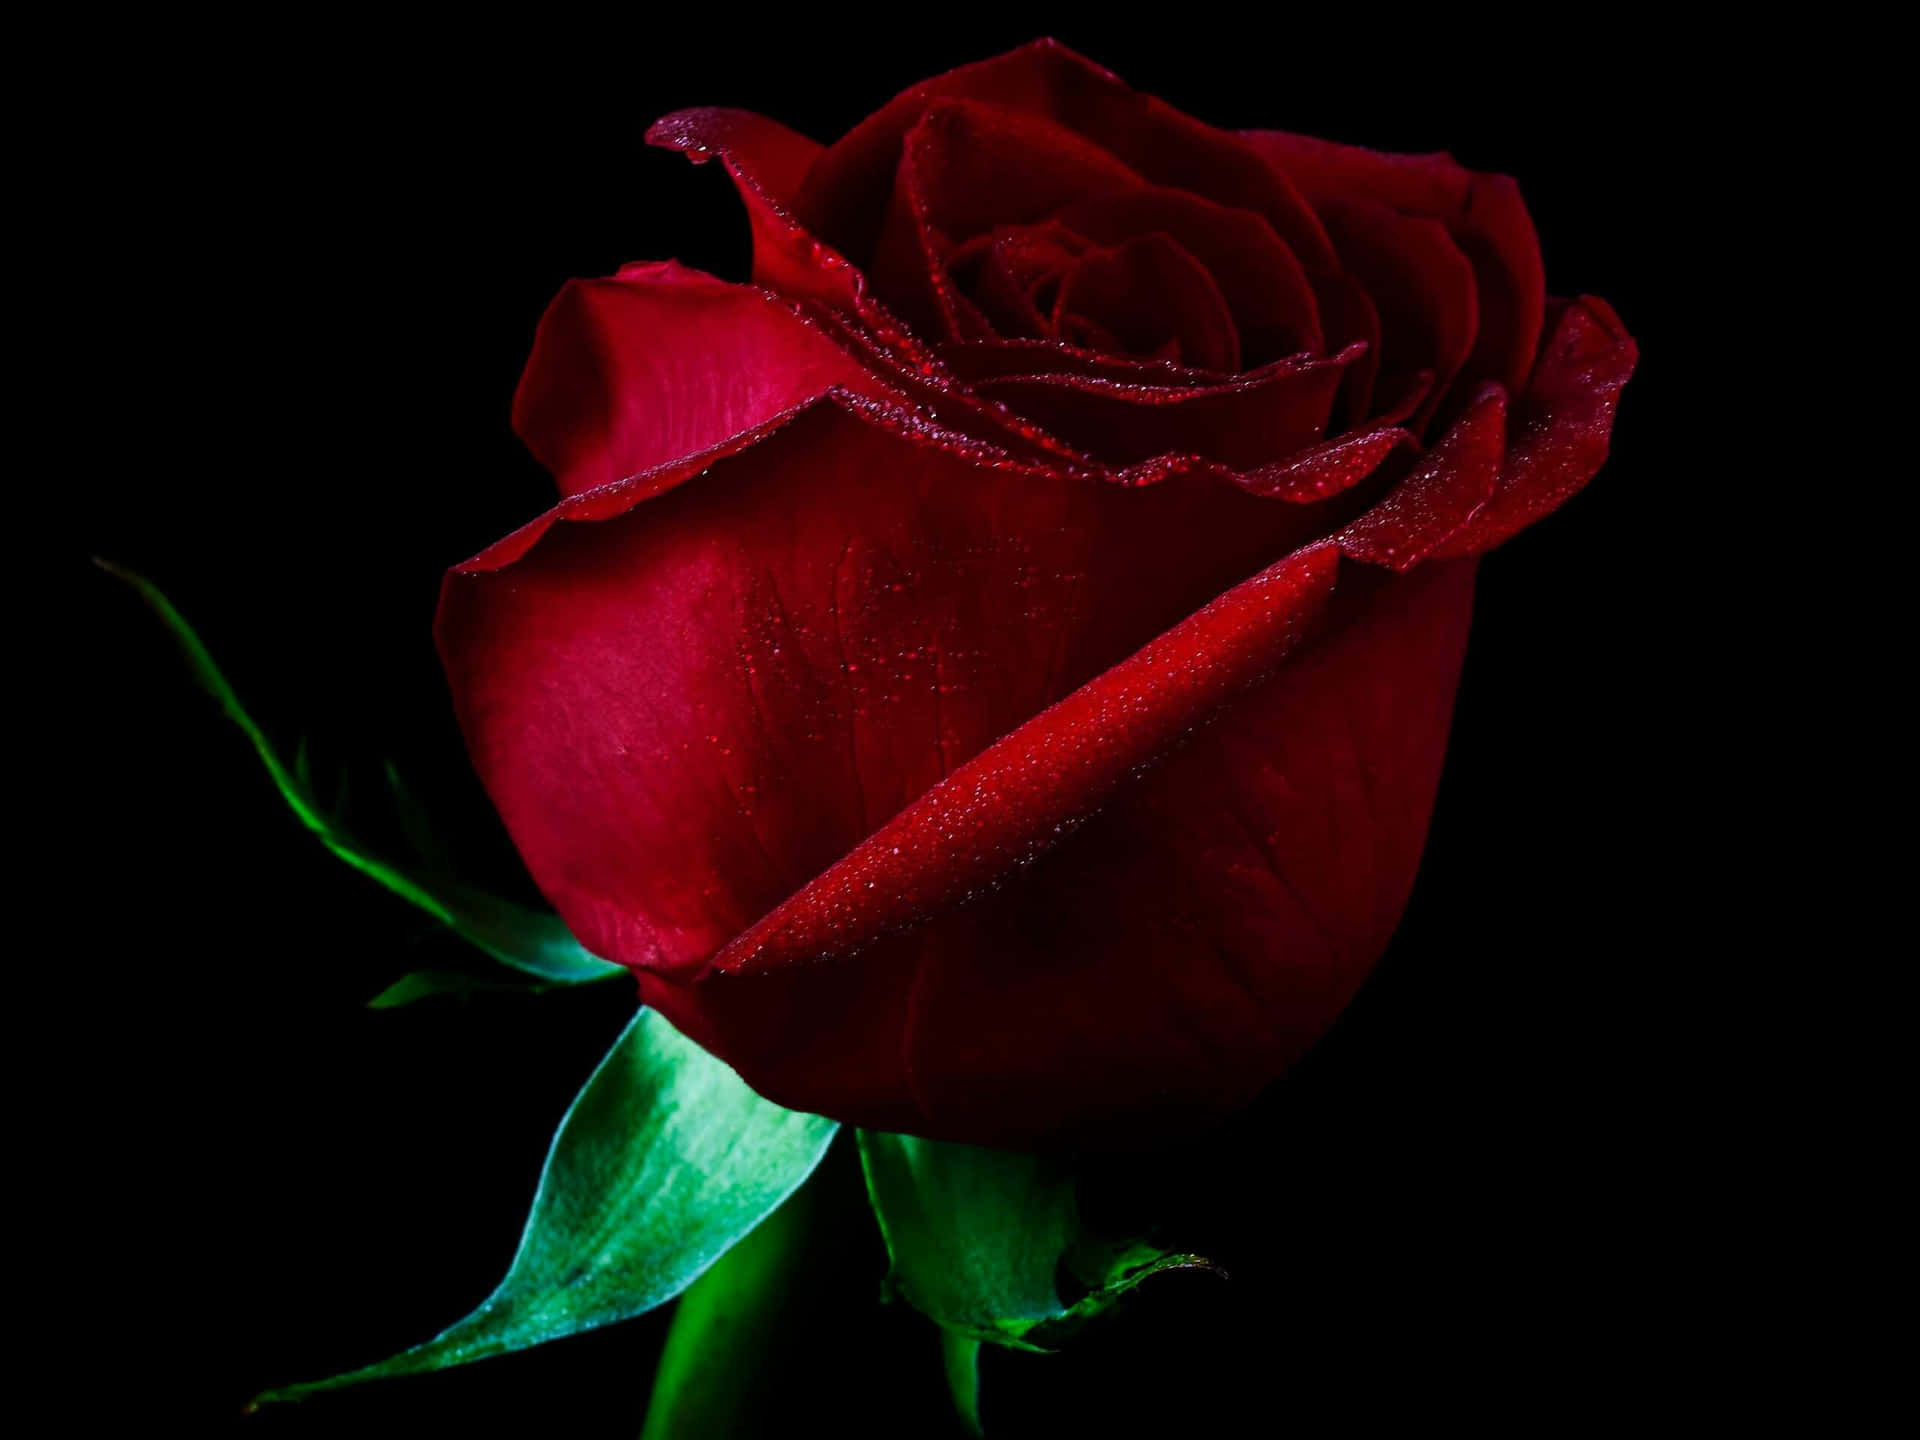 "An Intensely Colored Rose". Wallpaper